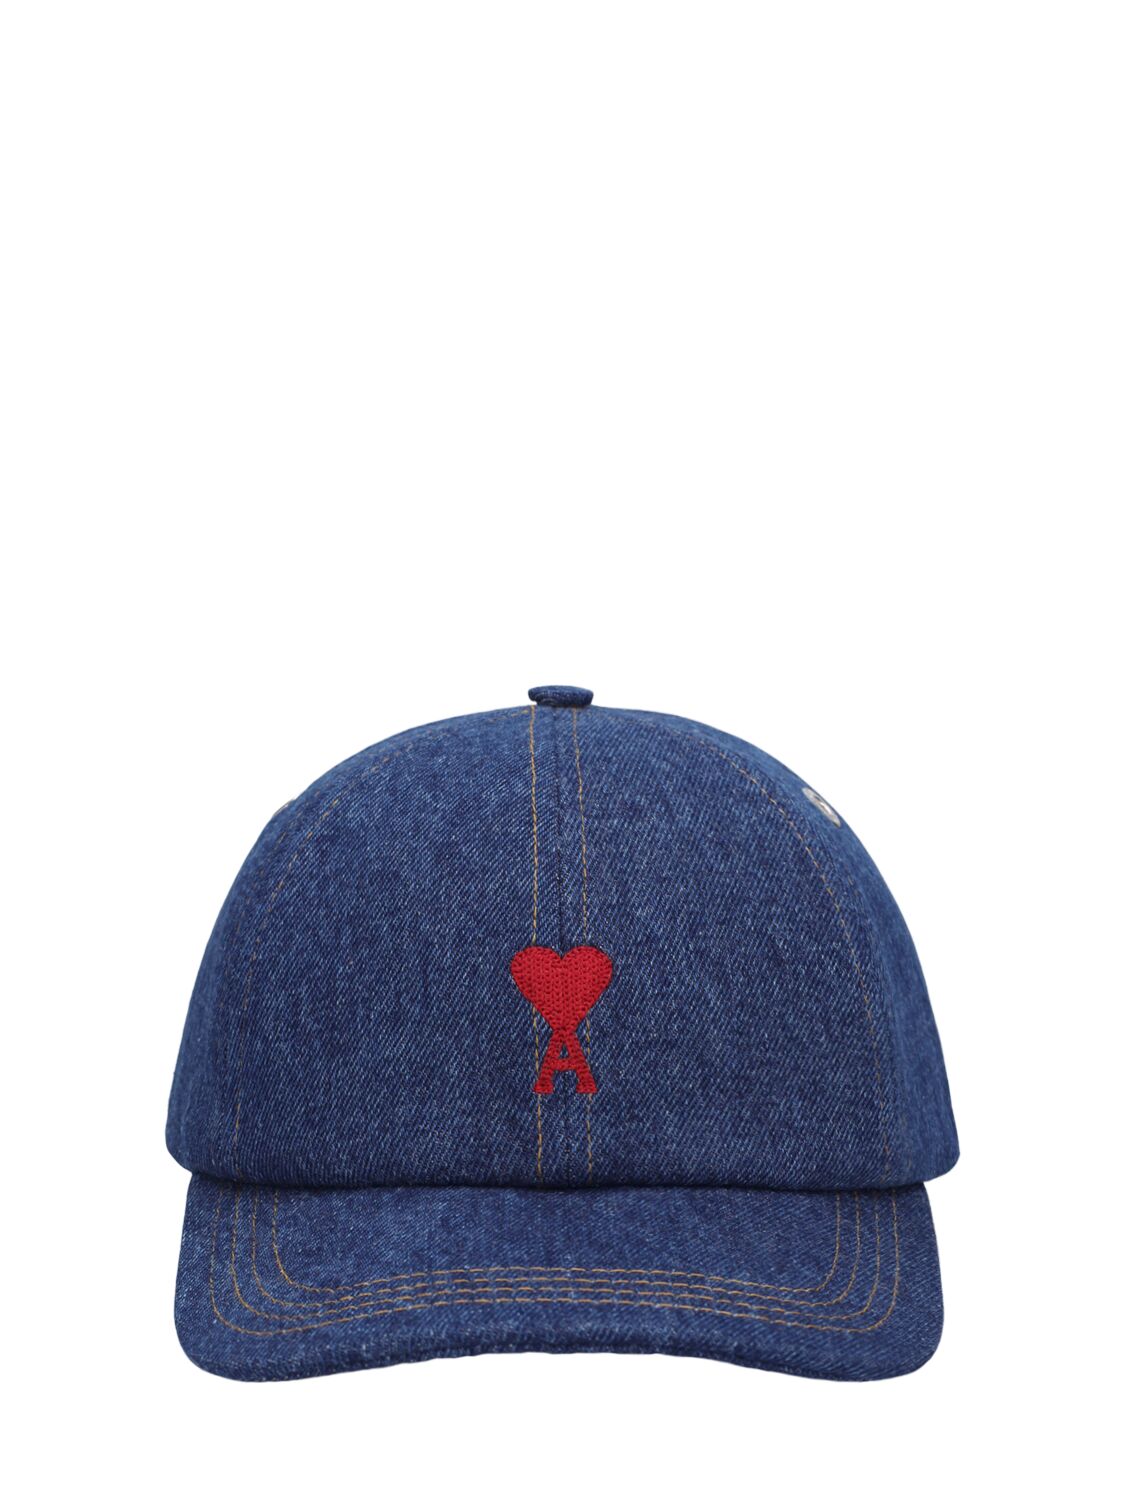 Image of Red Adc Embroidery Cap